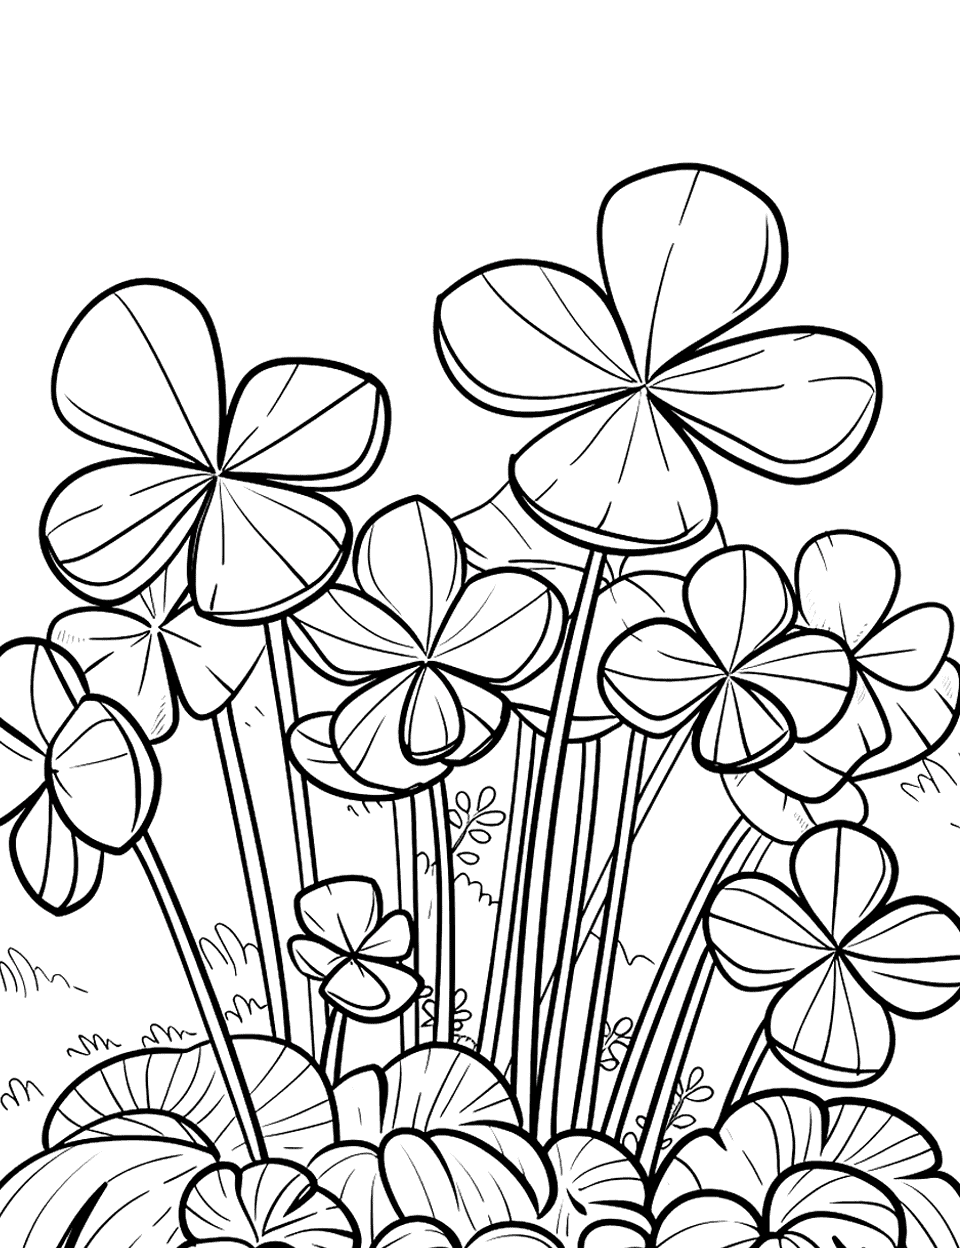 Oxalis Acetosella in a Forest Clearing Shamrock Coloring Page - Oxalis acetosella, commonly known as wood sorrel, flourishing in a small forest clearing.